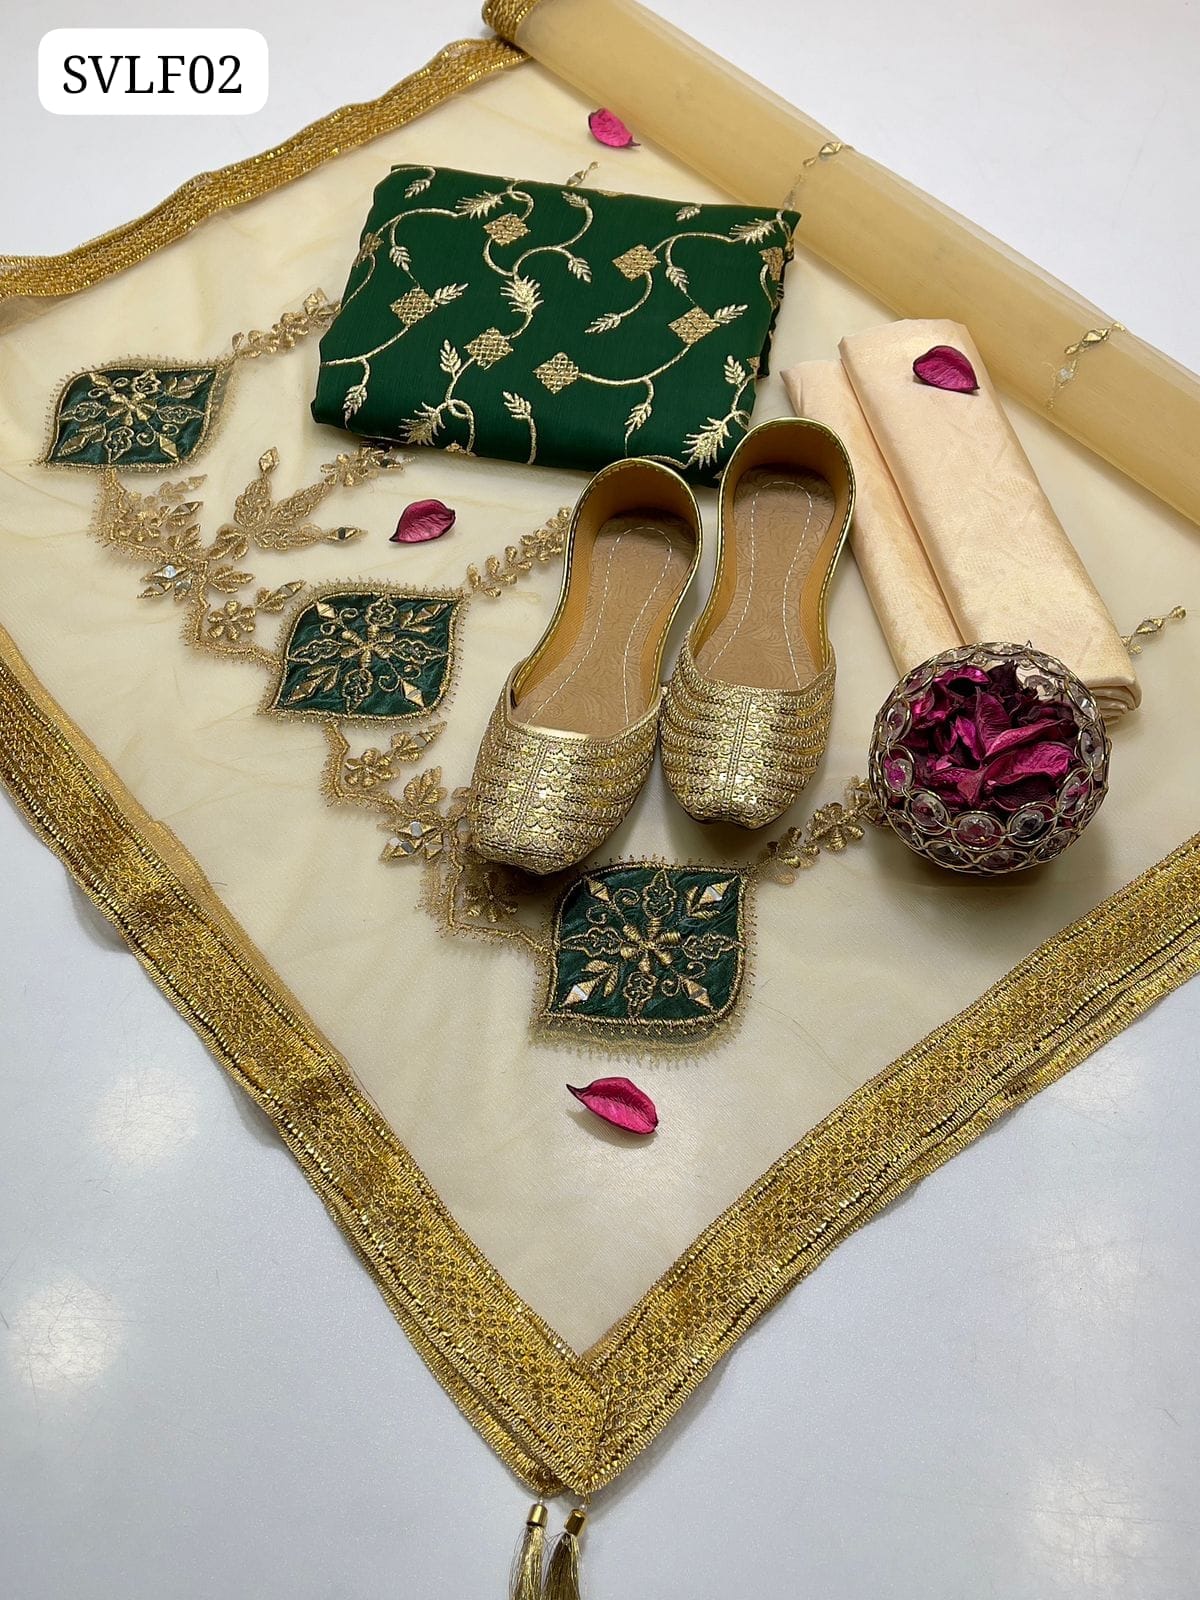 Chiffon Fabric All Over (front, back & sleeves) Sequence Tilla And Sitara Jaal Embroidery Shirt With Indian Net Handmade Mirror And Appliqué Work Dupatta With 4 Side Border Lass & Tussles And Self Embossed Masuri Trouser 3Pc Dress With Khussa As a Gift